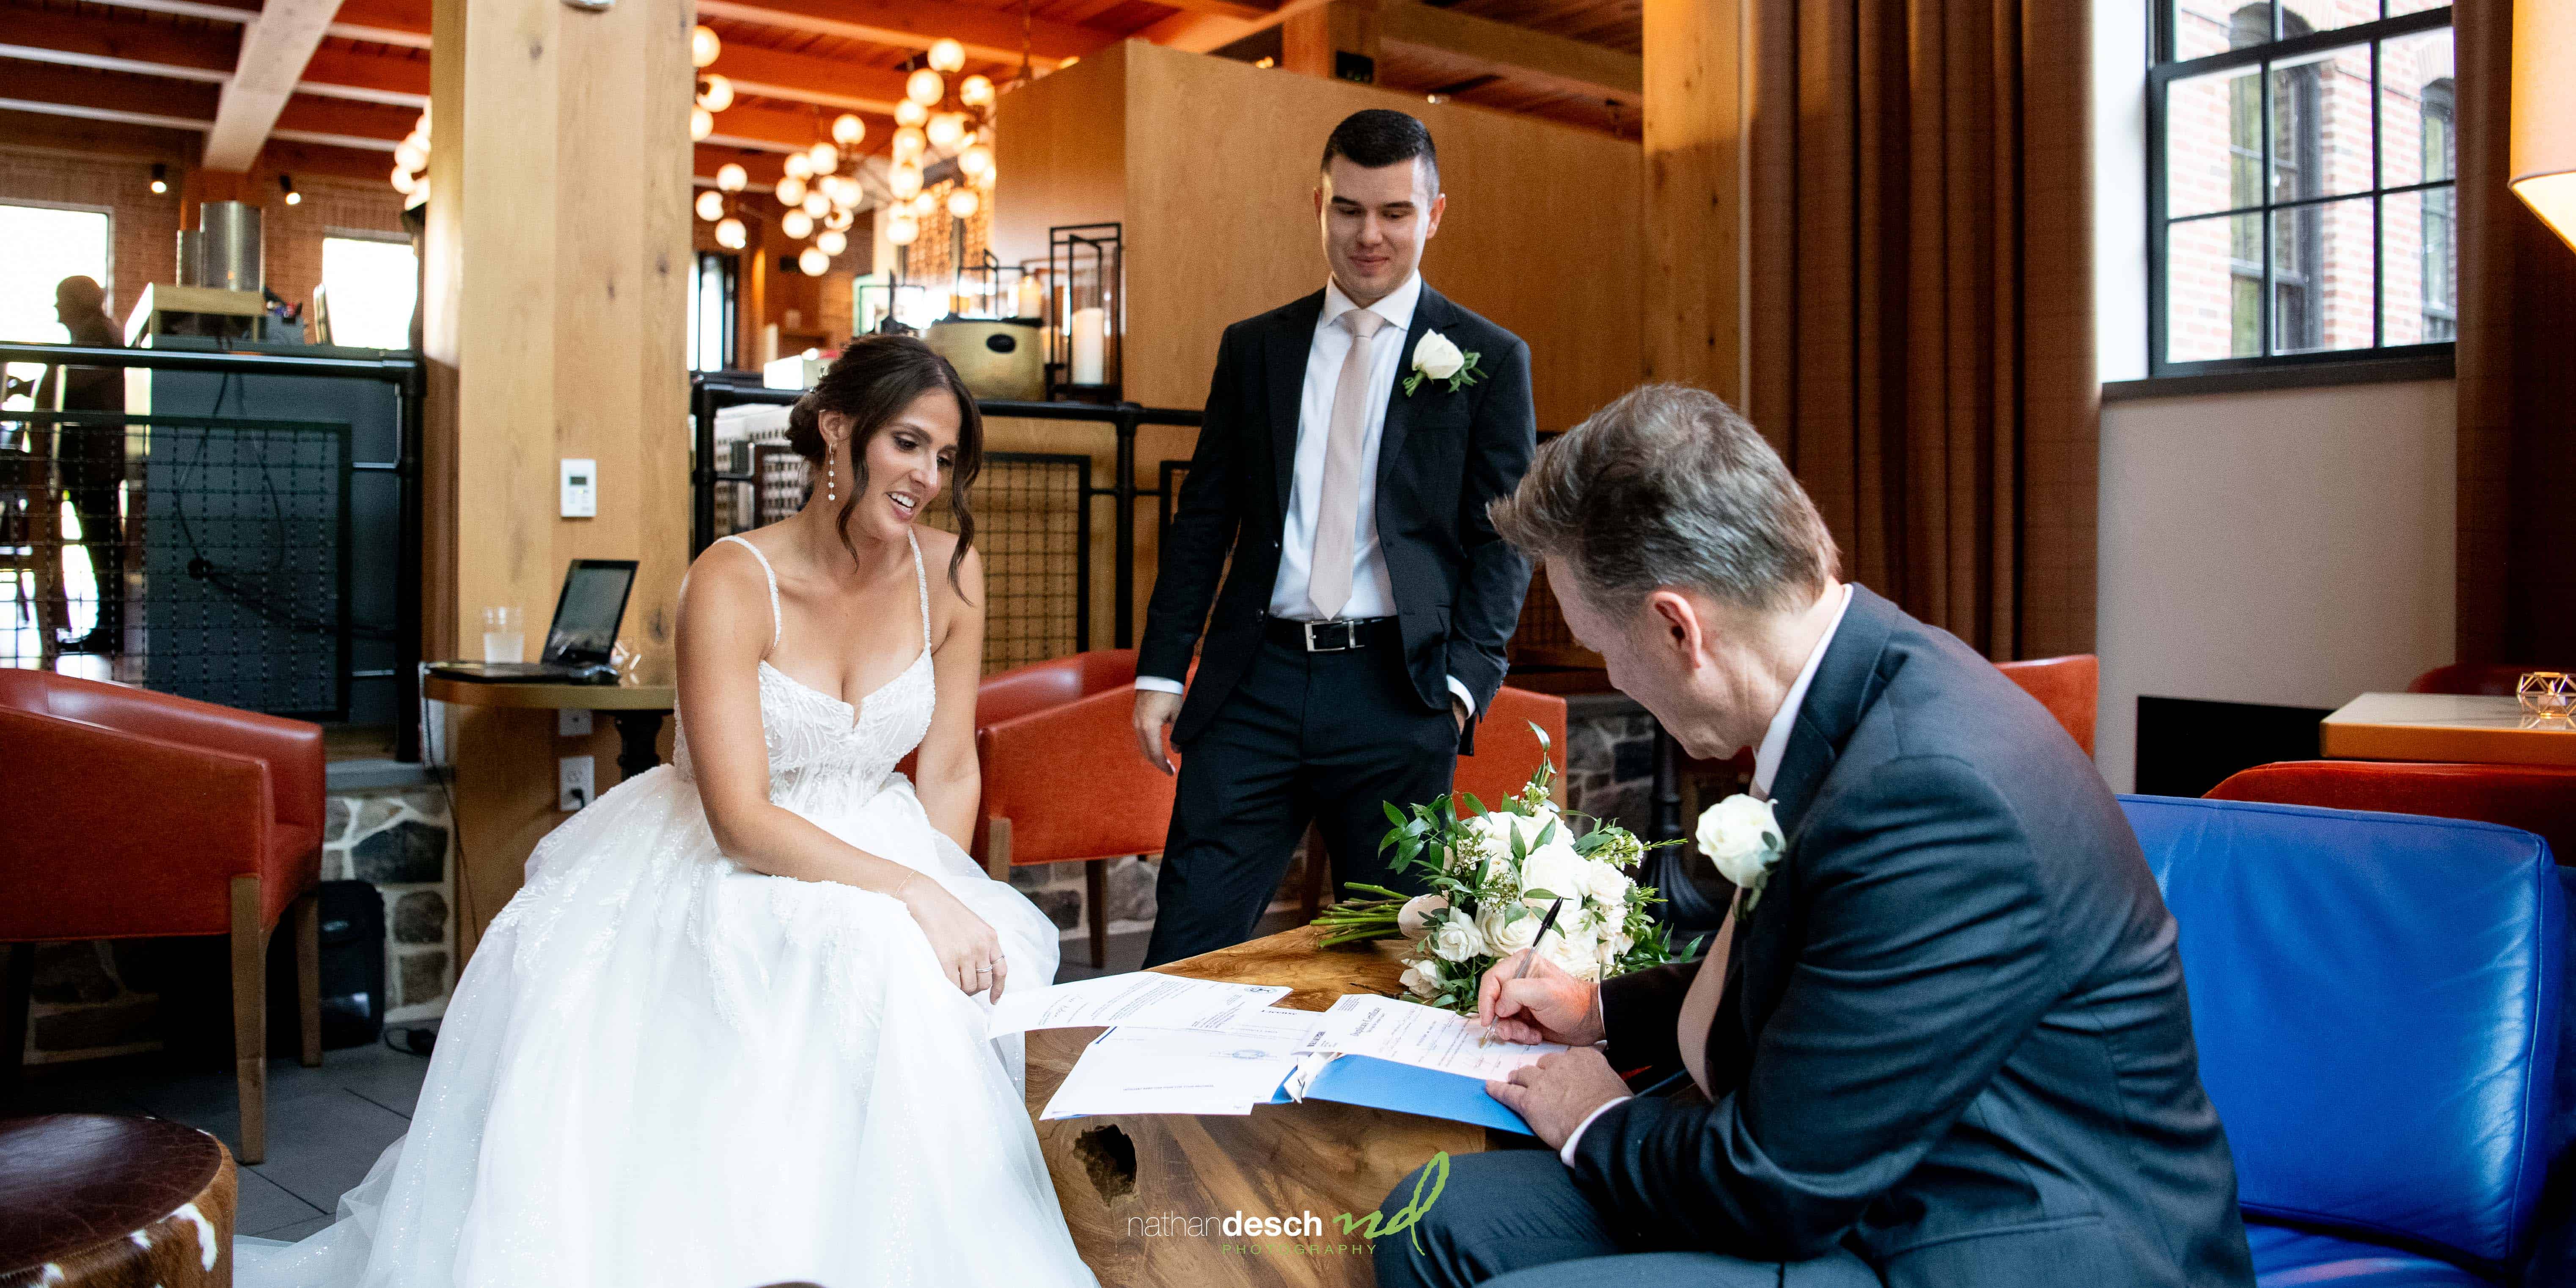 signing the marriage certificate